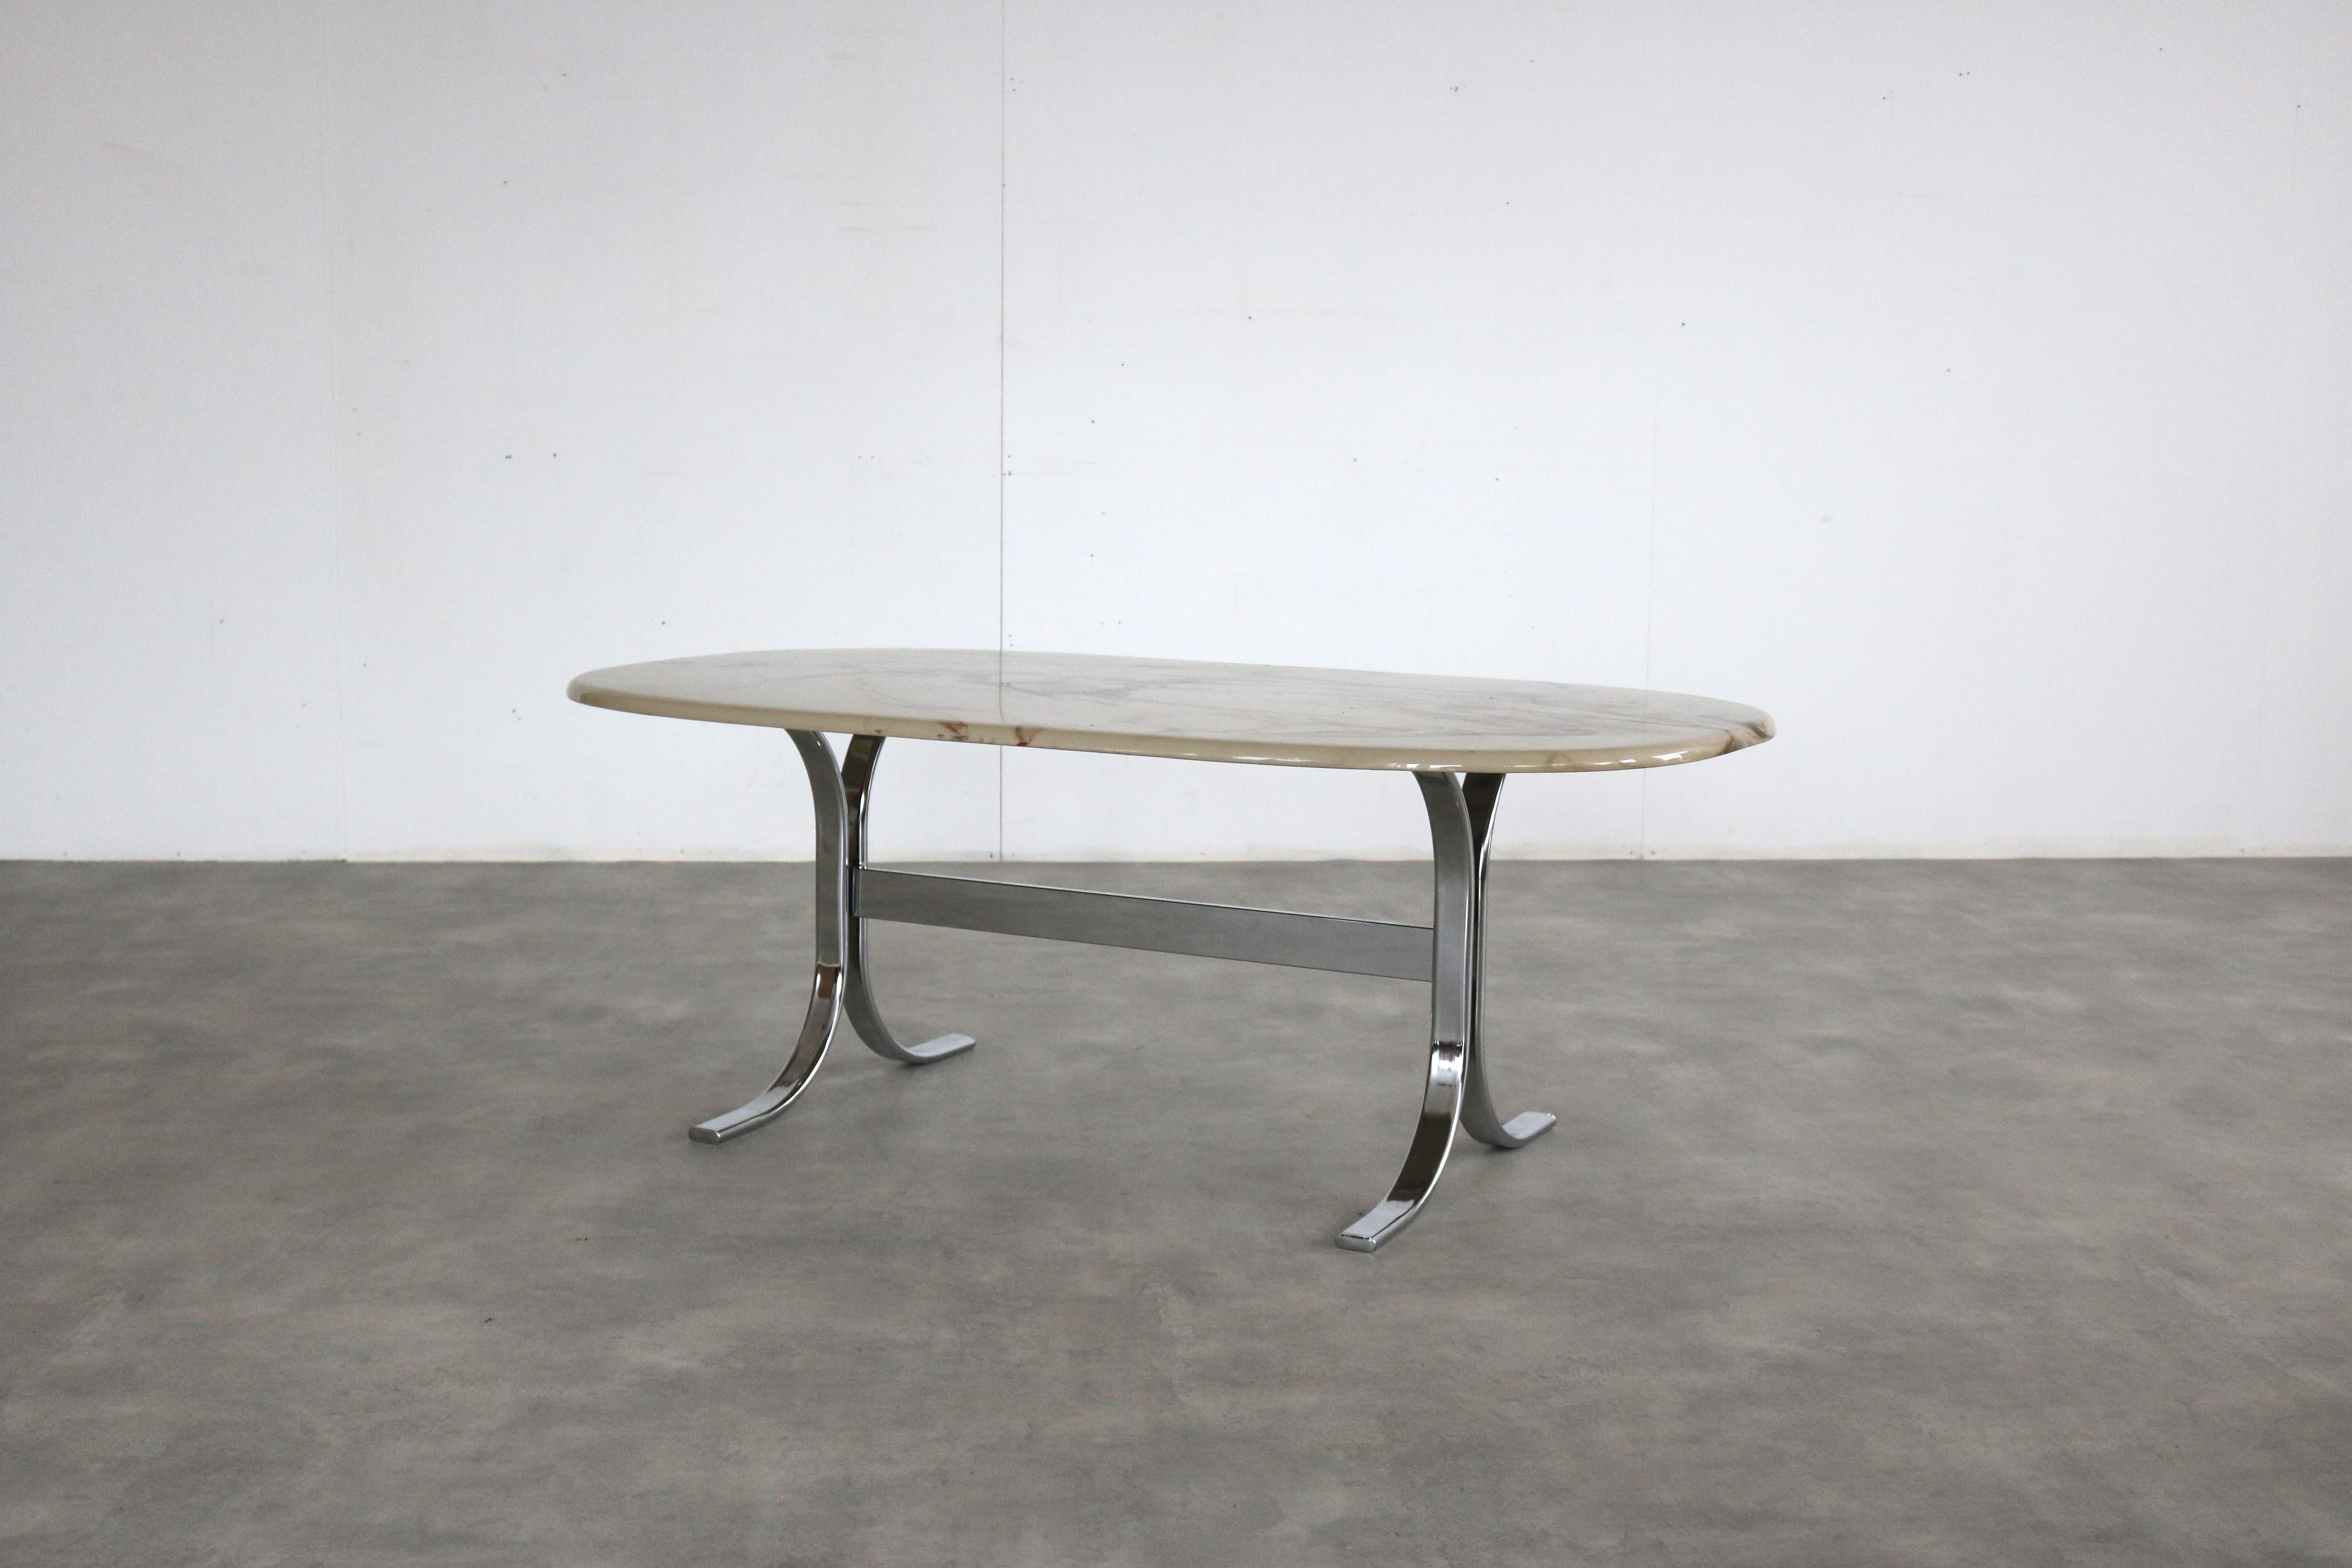 vintage coffee table | table | marble | Sweden (3)

period | 70s
design | unknown | Sweden
condition | good | light signs of use
size | 52 x 140 x 80 (hxwxd)

details | chrome; marble;

article number | 2175